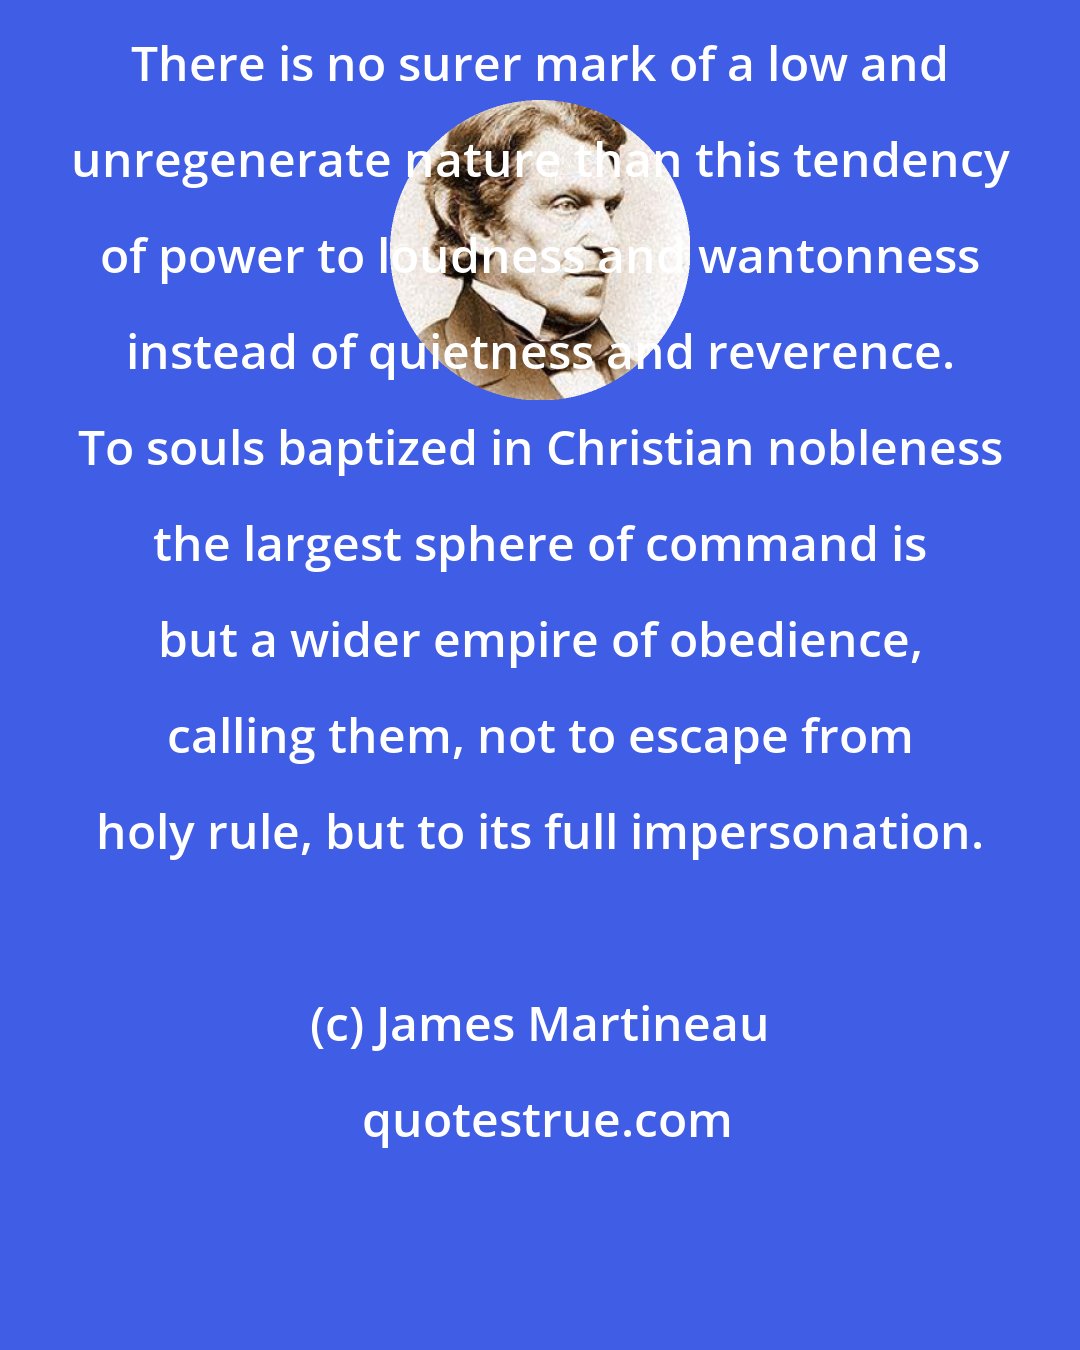 James Martineau: There is no surer mark of a low and unregenerate nature than this tendency of power to loudness and wantonness instead of quietness and reverence. To souls baptized in Christian nobleness the largest sphere of command is but a wider empire of obedience, calling them, not to escape from holy rule, but to its full impersonation.